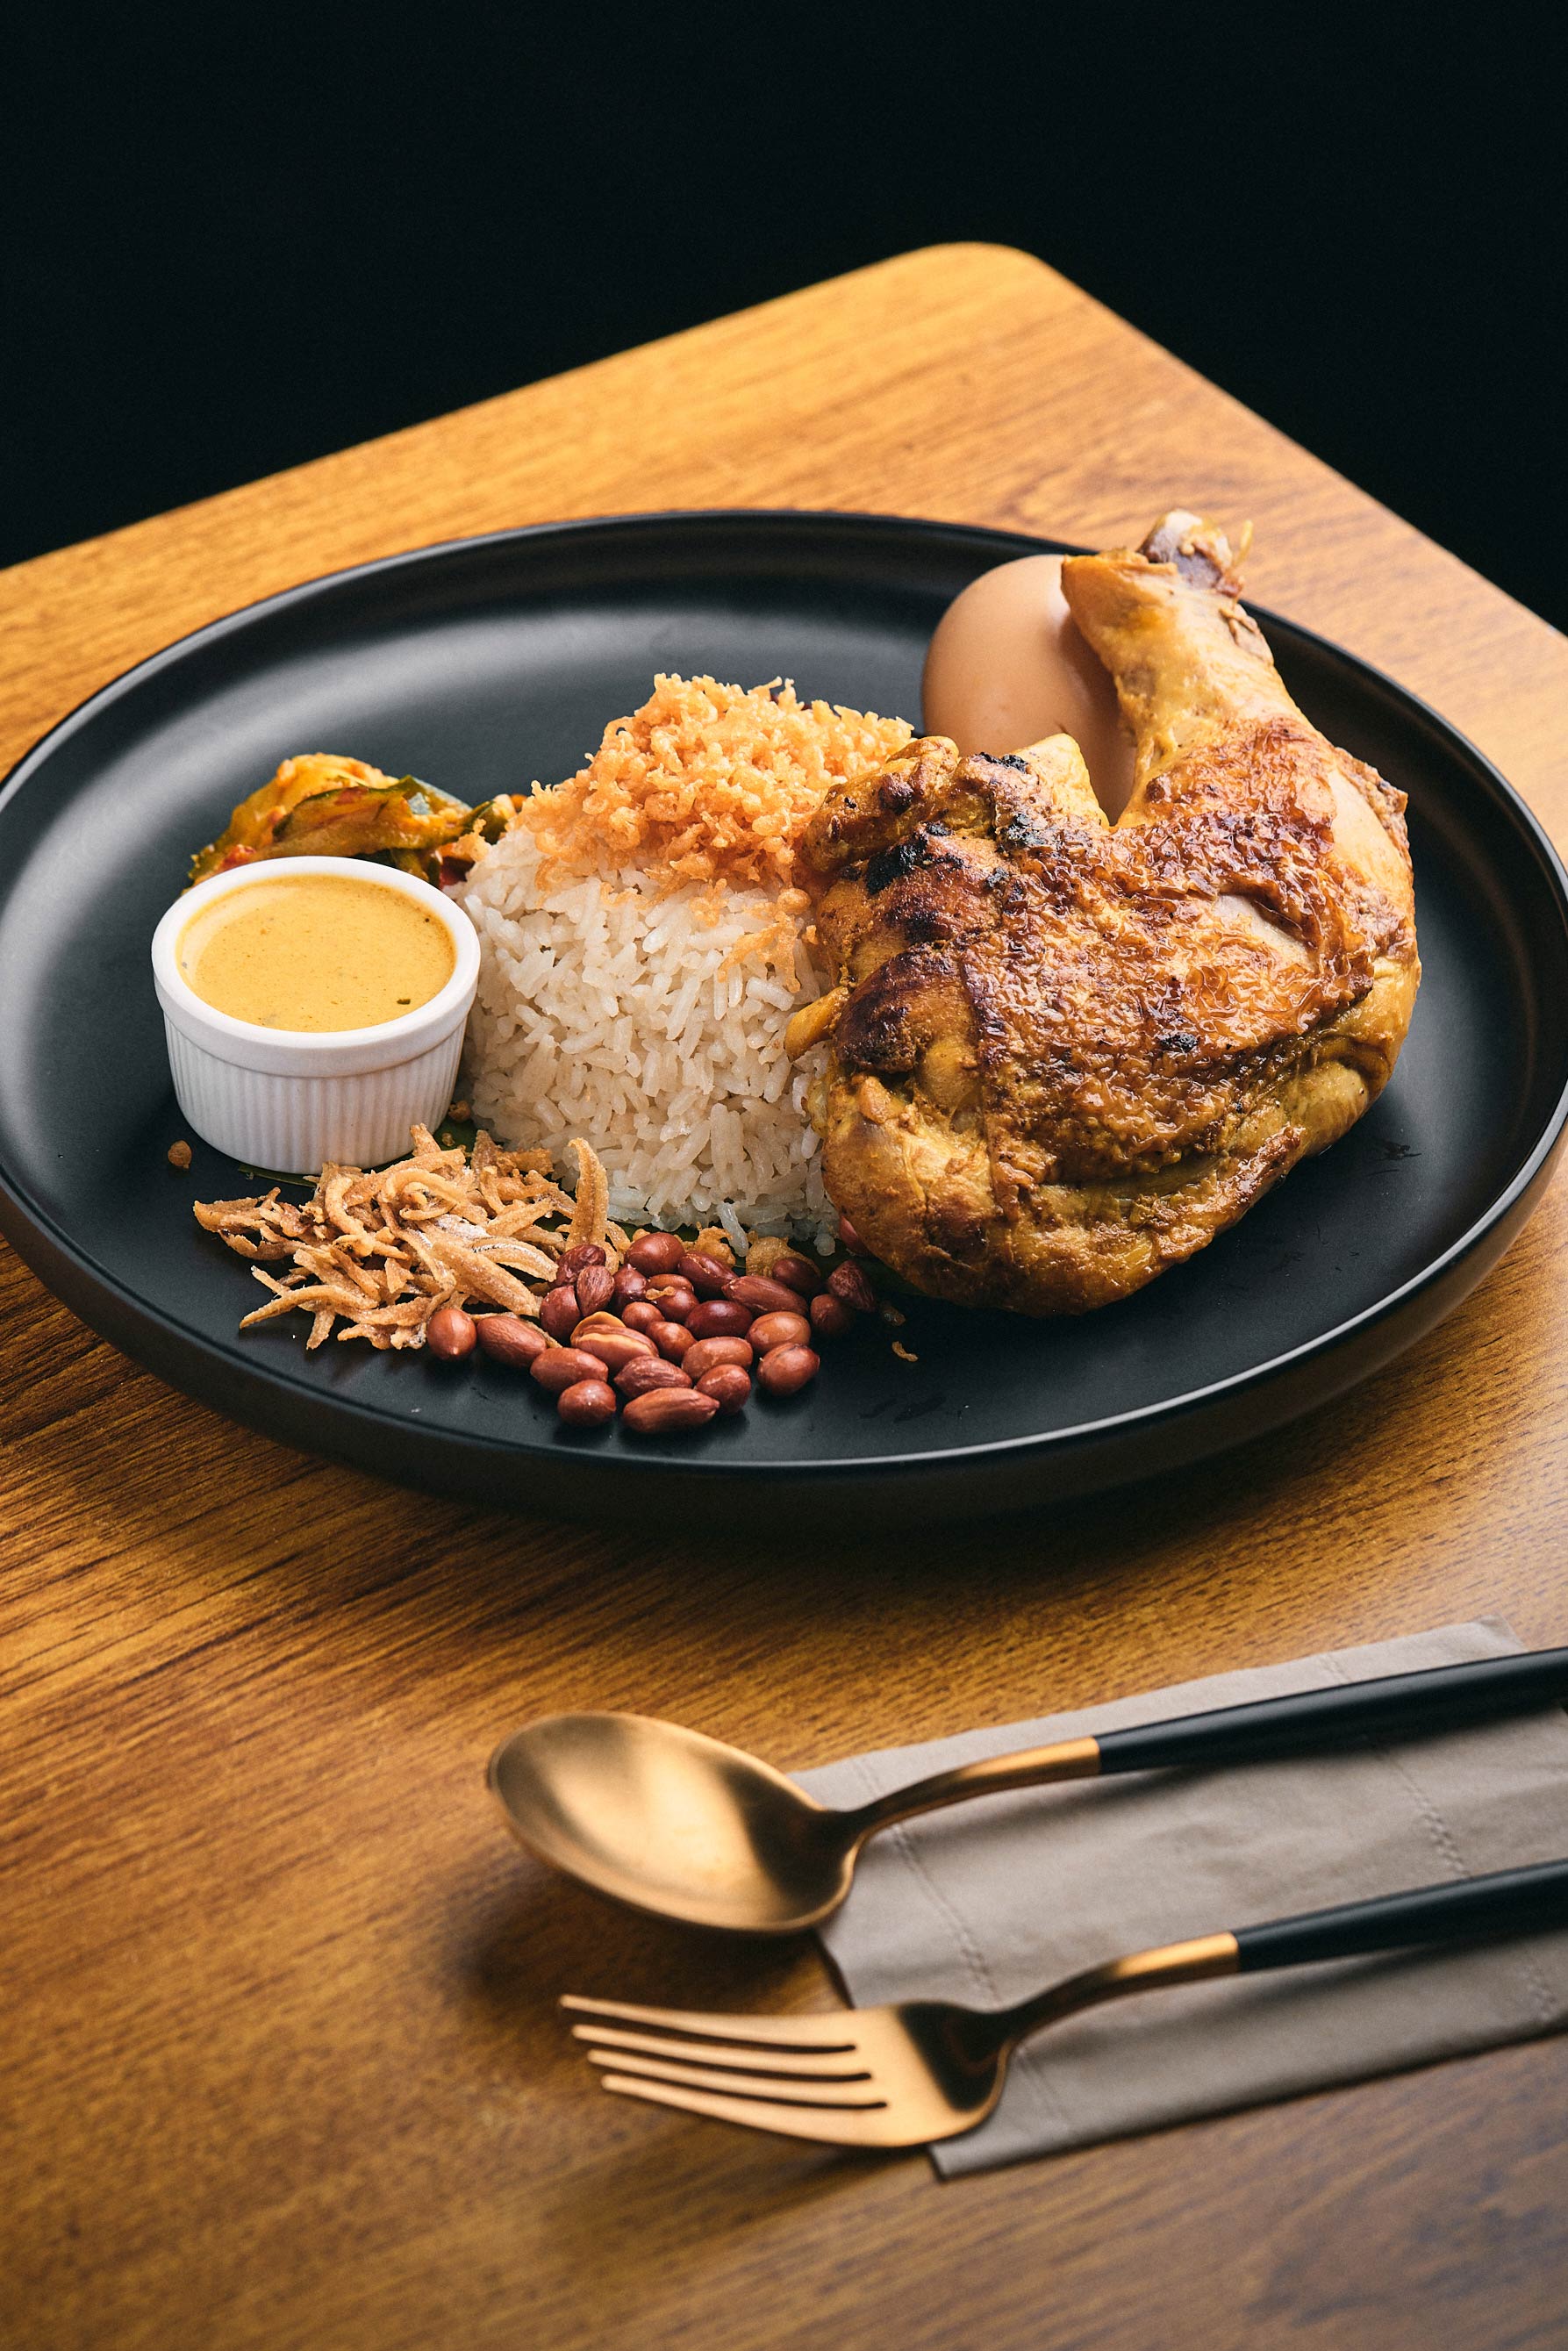 Wholesome Lemak Drumstick, $11.50 (8 DAYS Pick!)